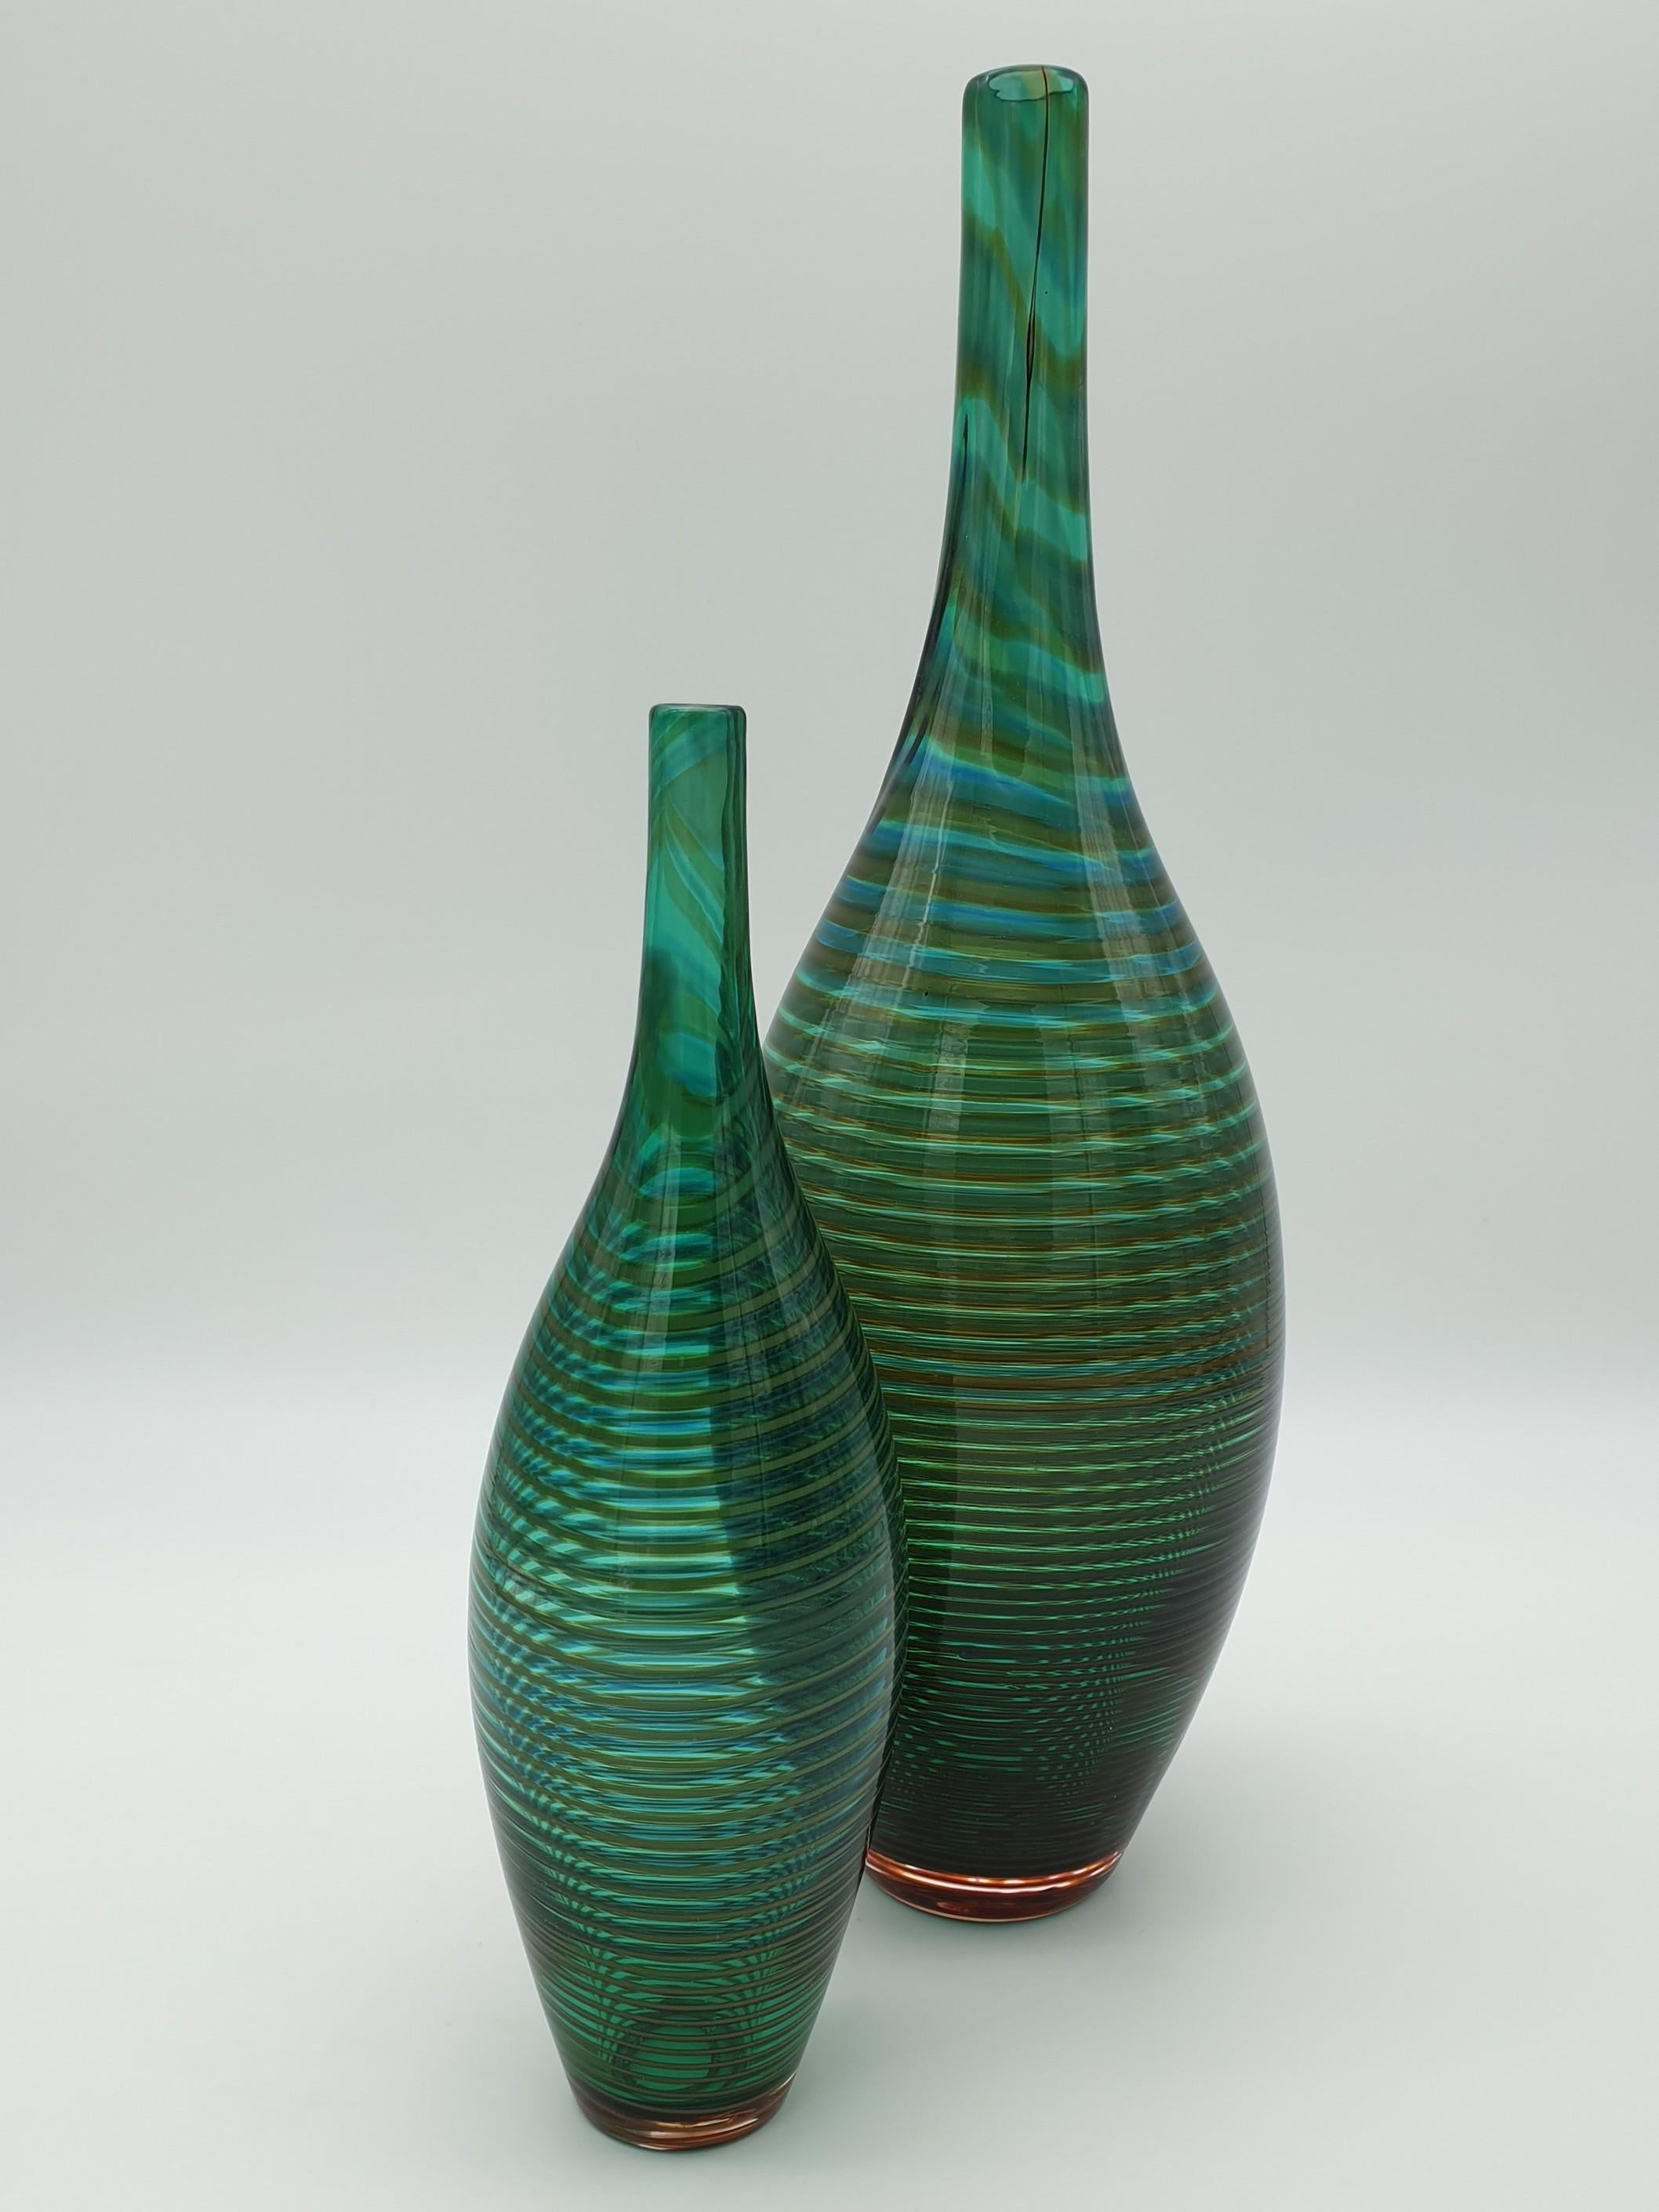 Hand-Crafted Decorative Murano Glass Bottles by Cenedese, Green and Amber Color, 1980s For Sale